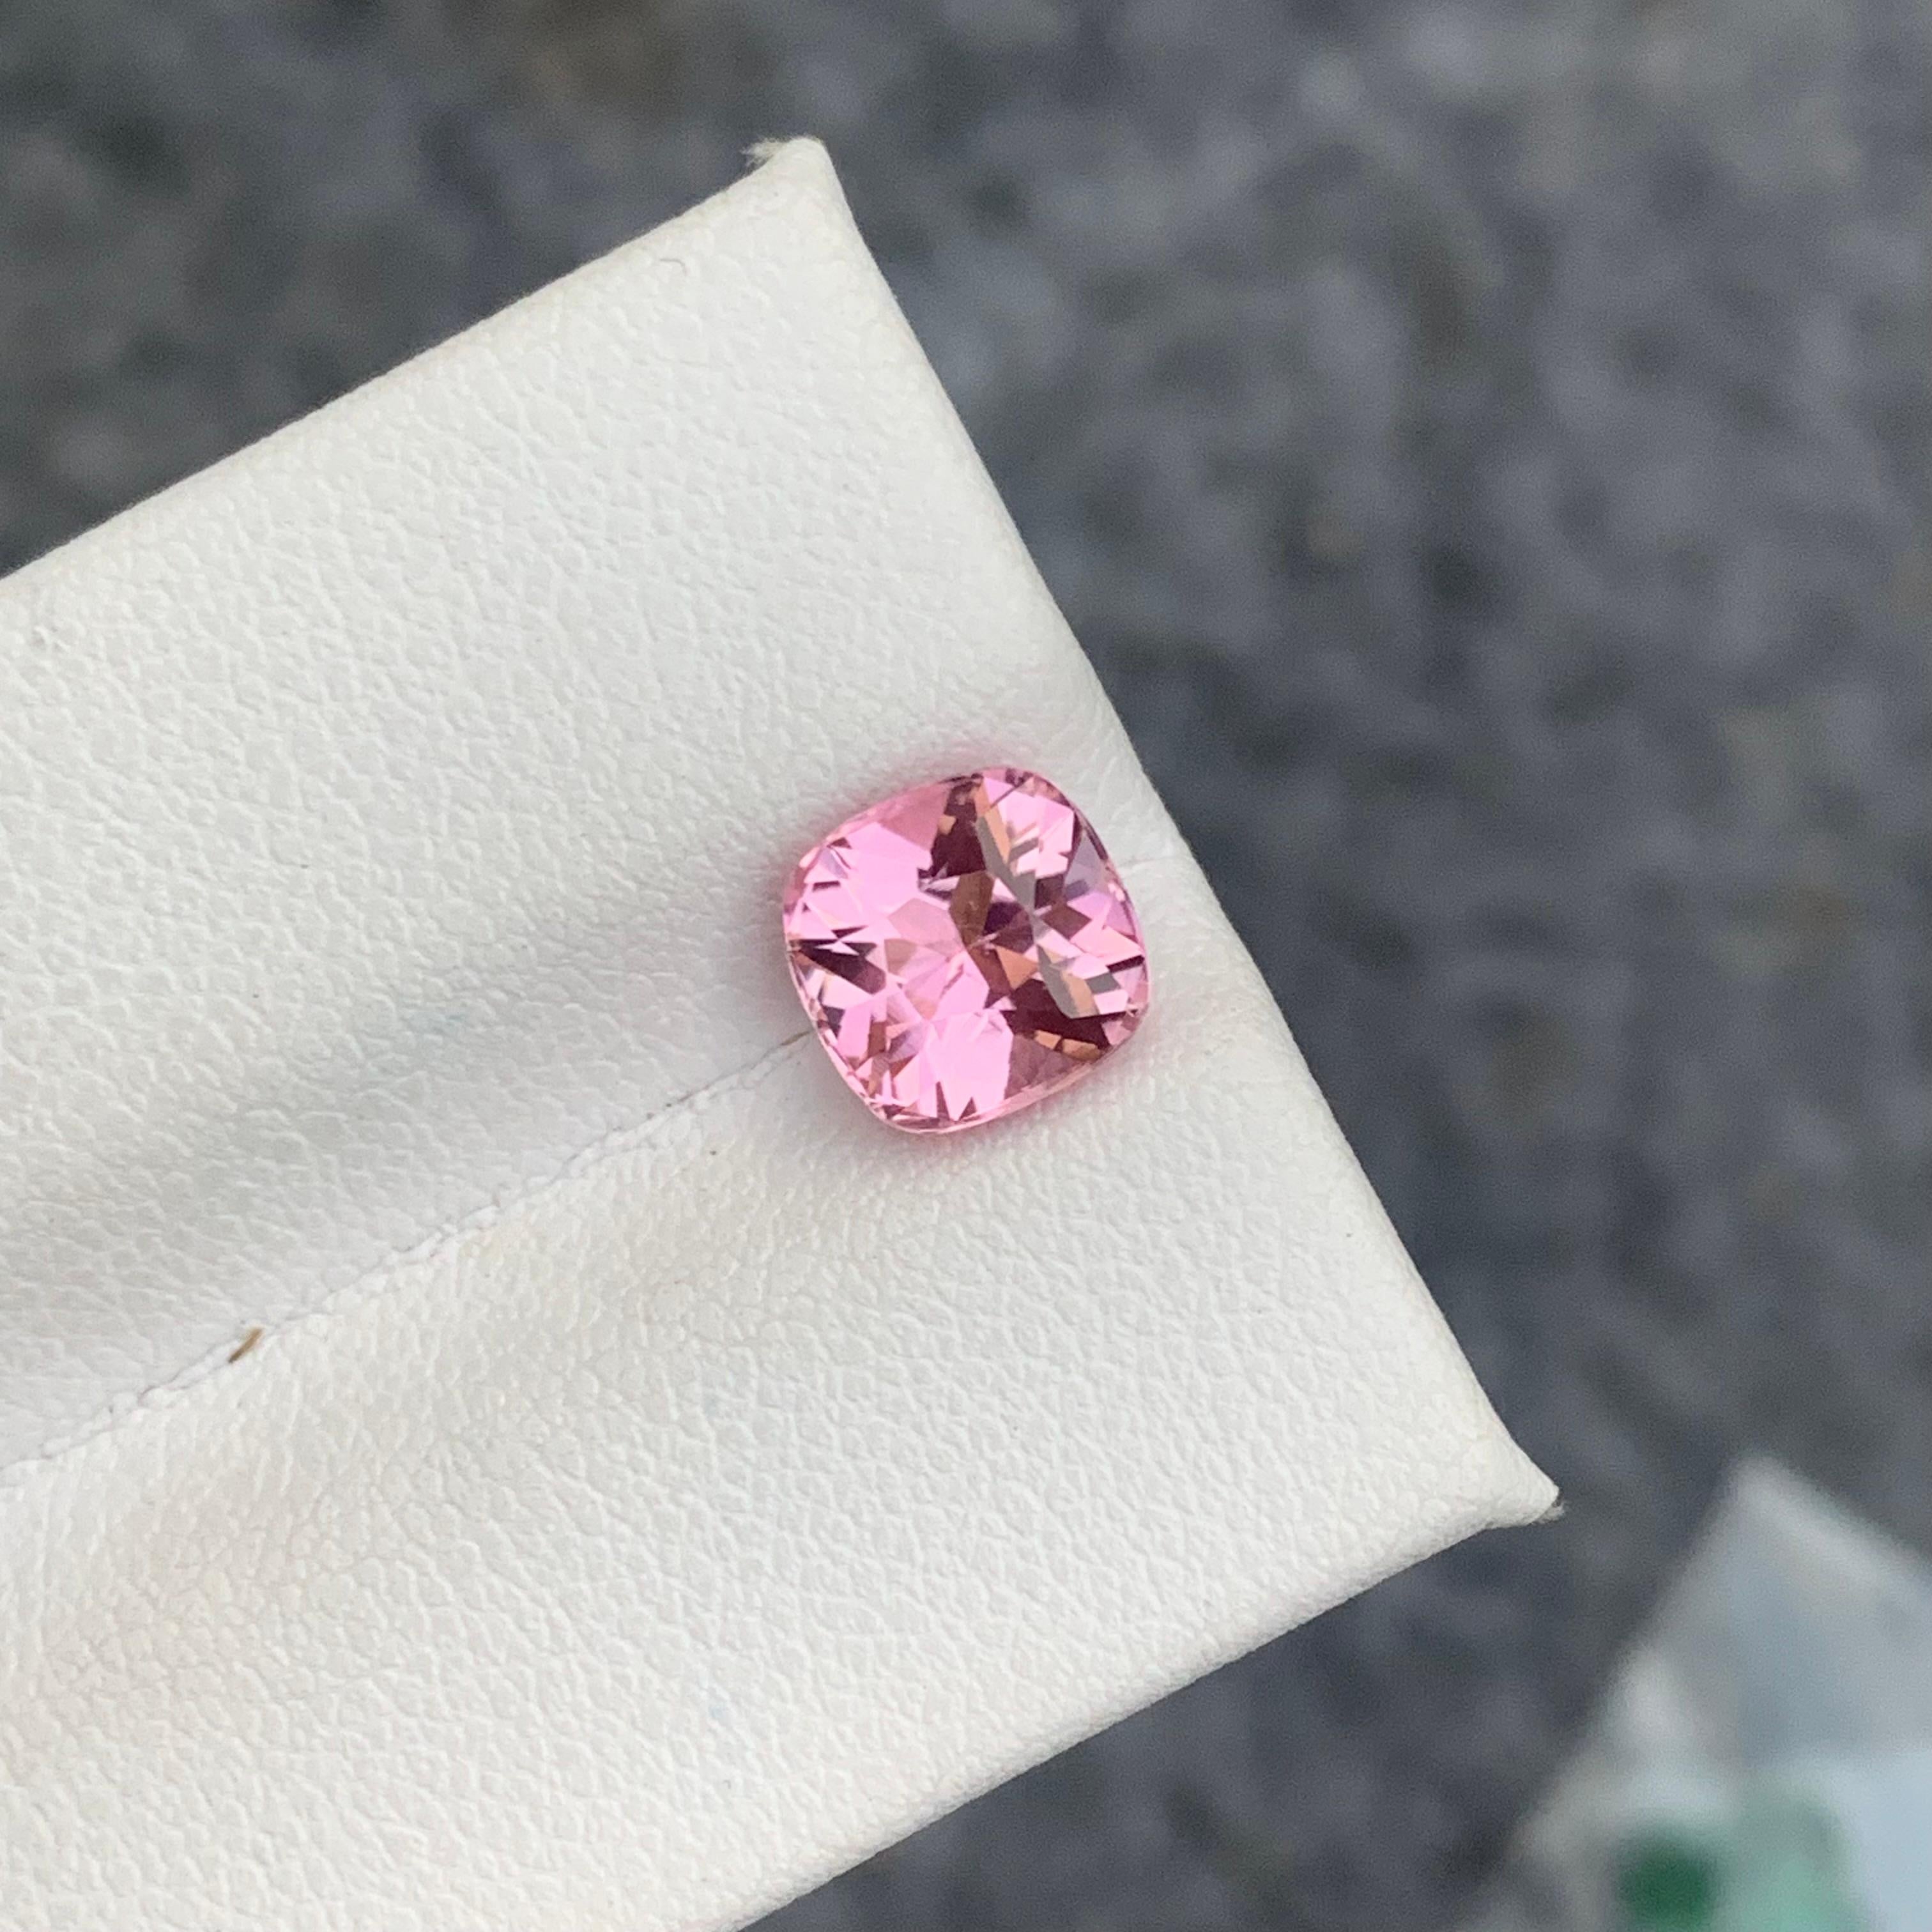 Exceptional 2.0 Carat Natural Loose Baby Pink Tourmaline from Afghan Mine For Sale 3